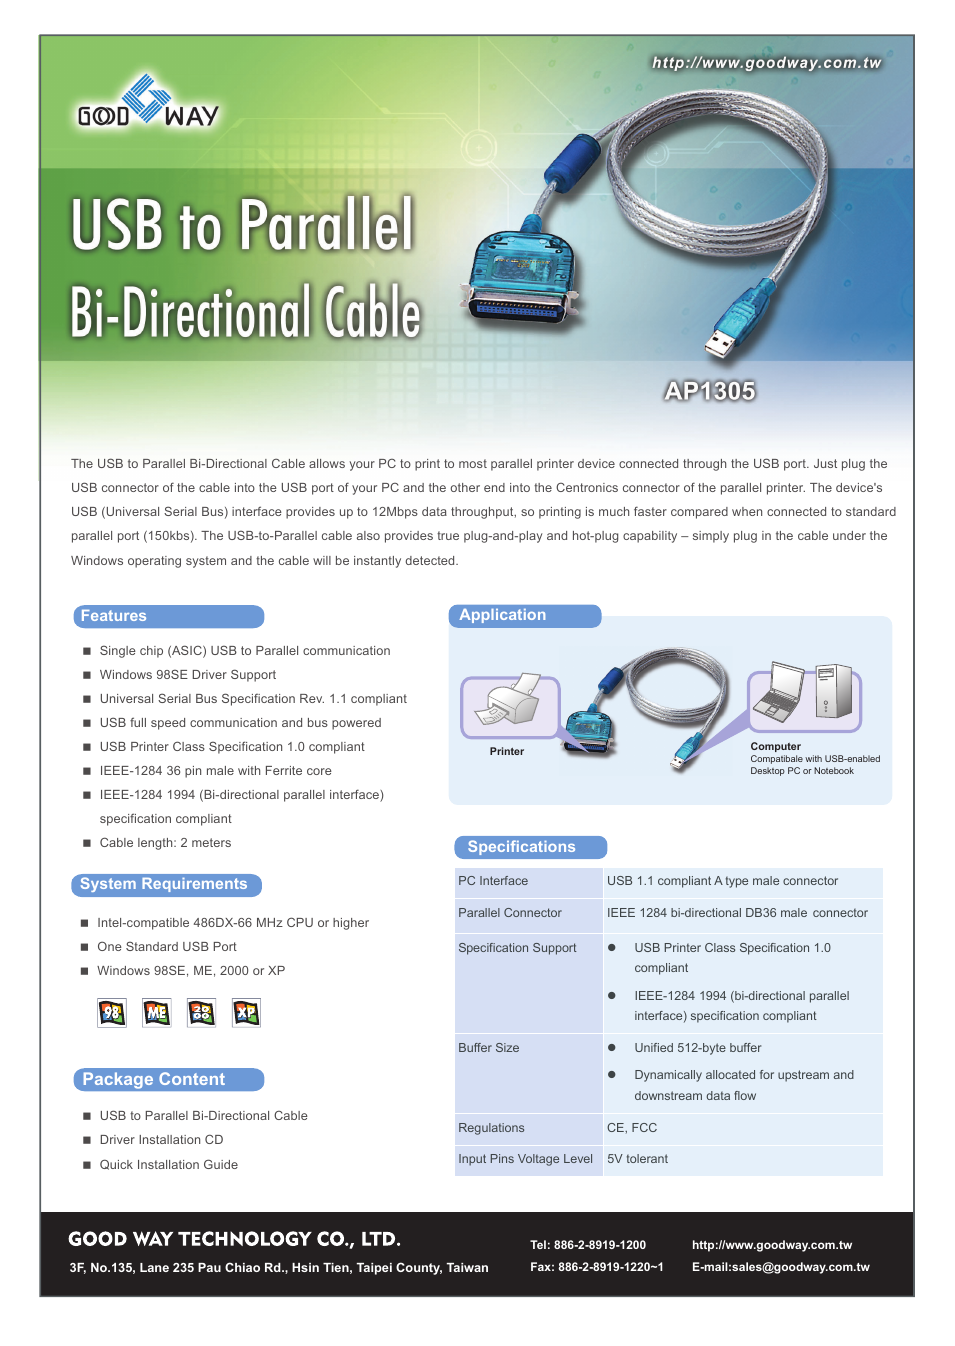 USB to Parallel Bi-Directional Cable AP1305